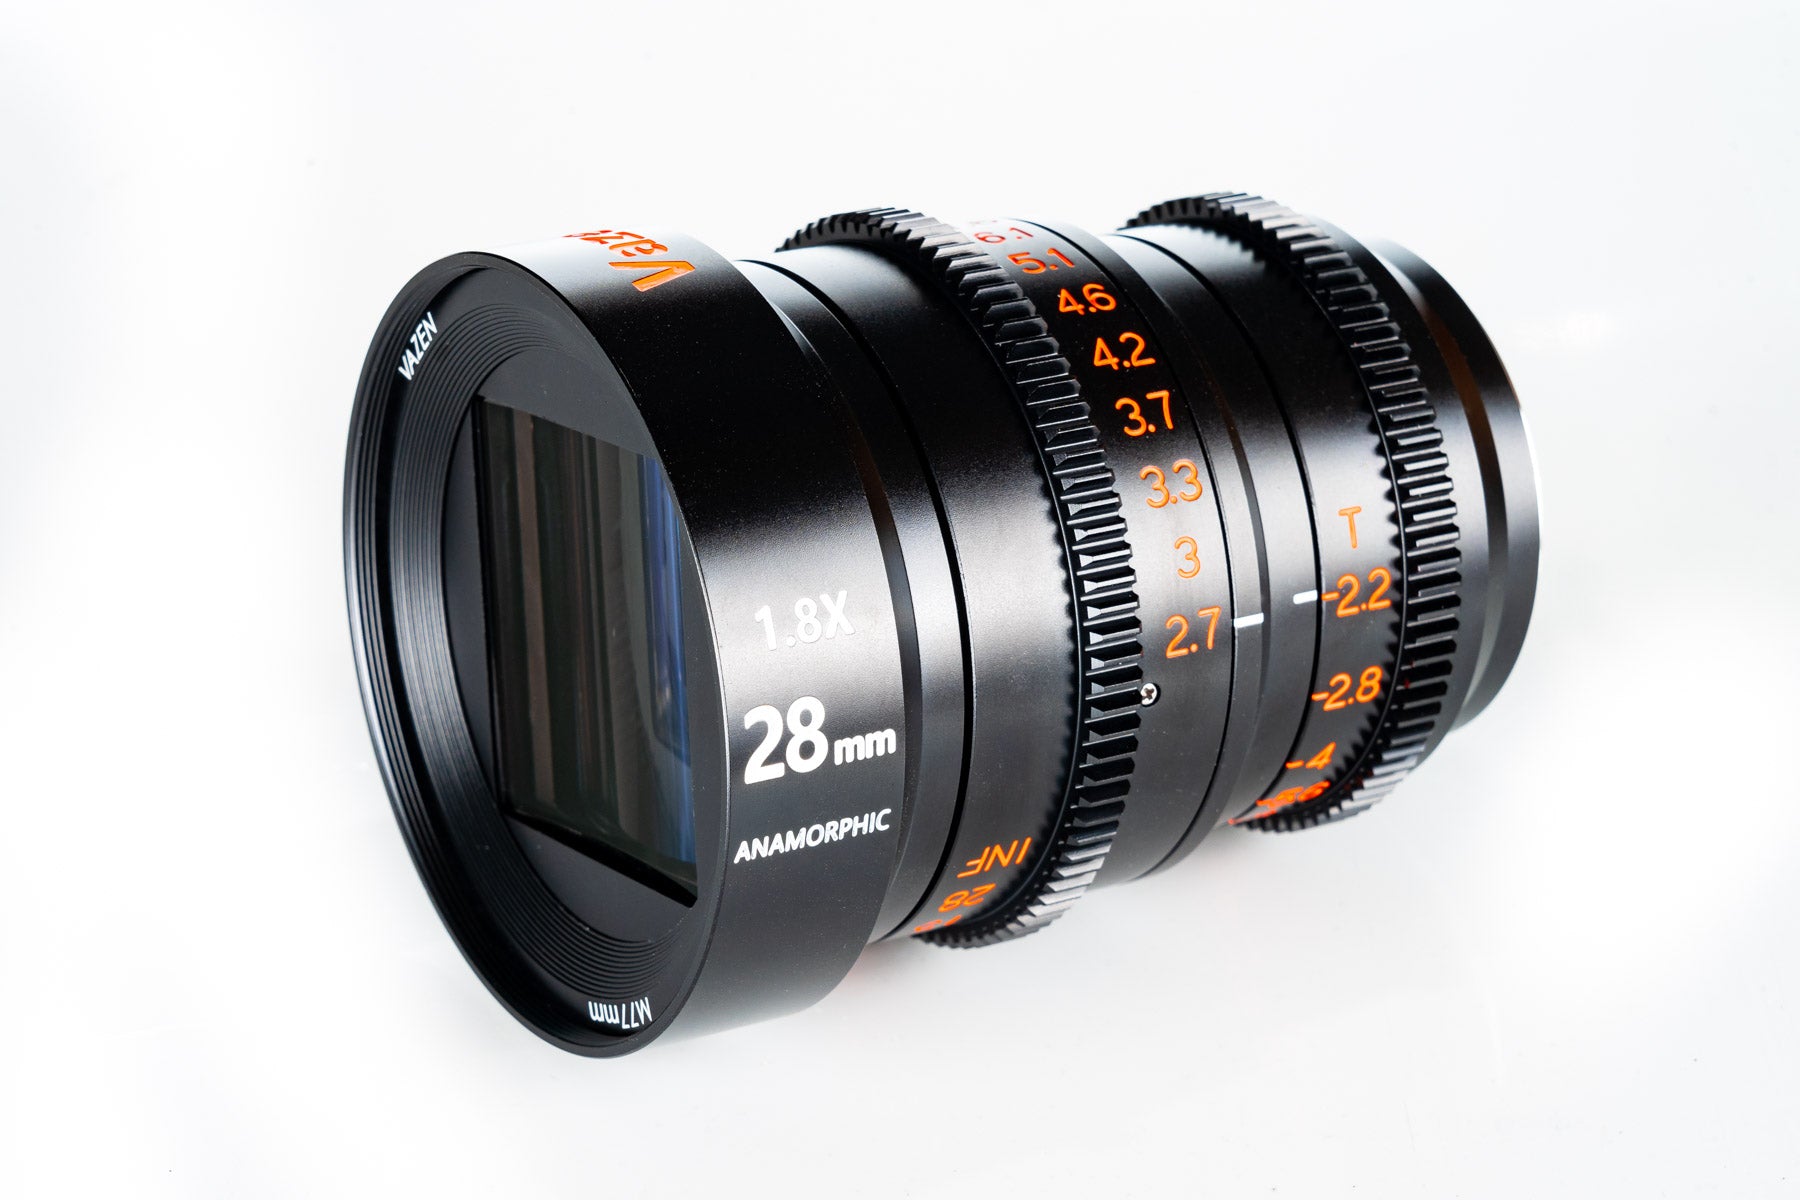 Vazen 28mm T/2.2 1.8X Anamorphic Lens for MFT Camera in a Front-Side View